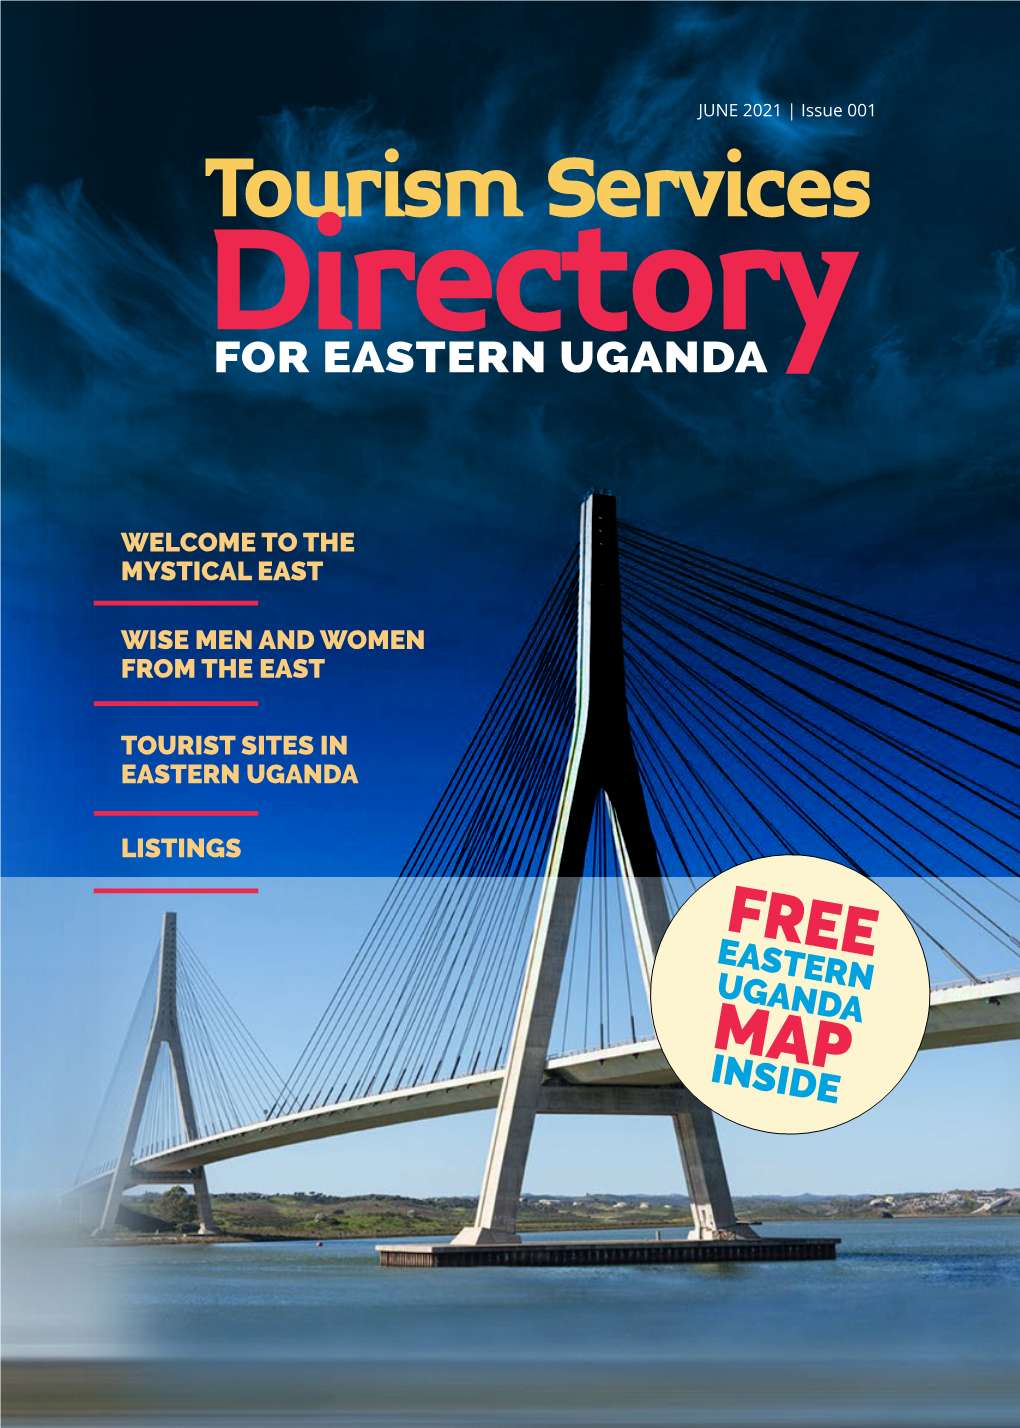 Tourism Services Directory for EASTERN UGANDA